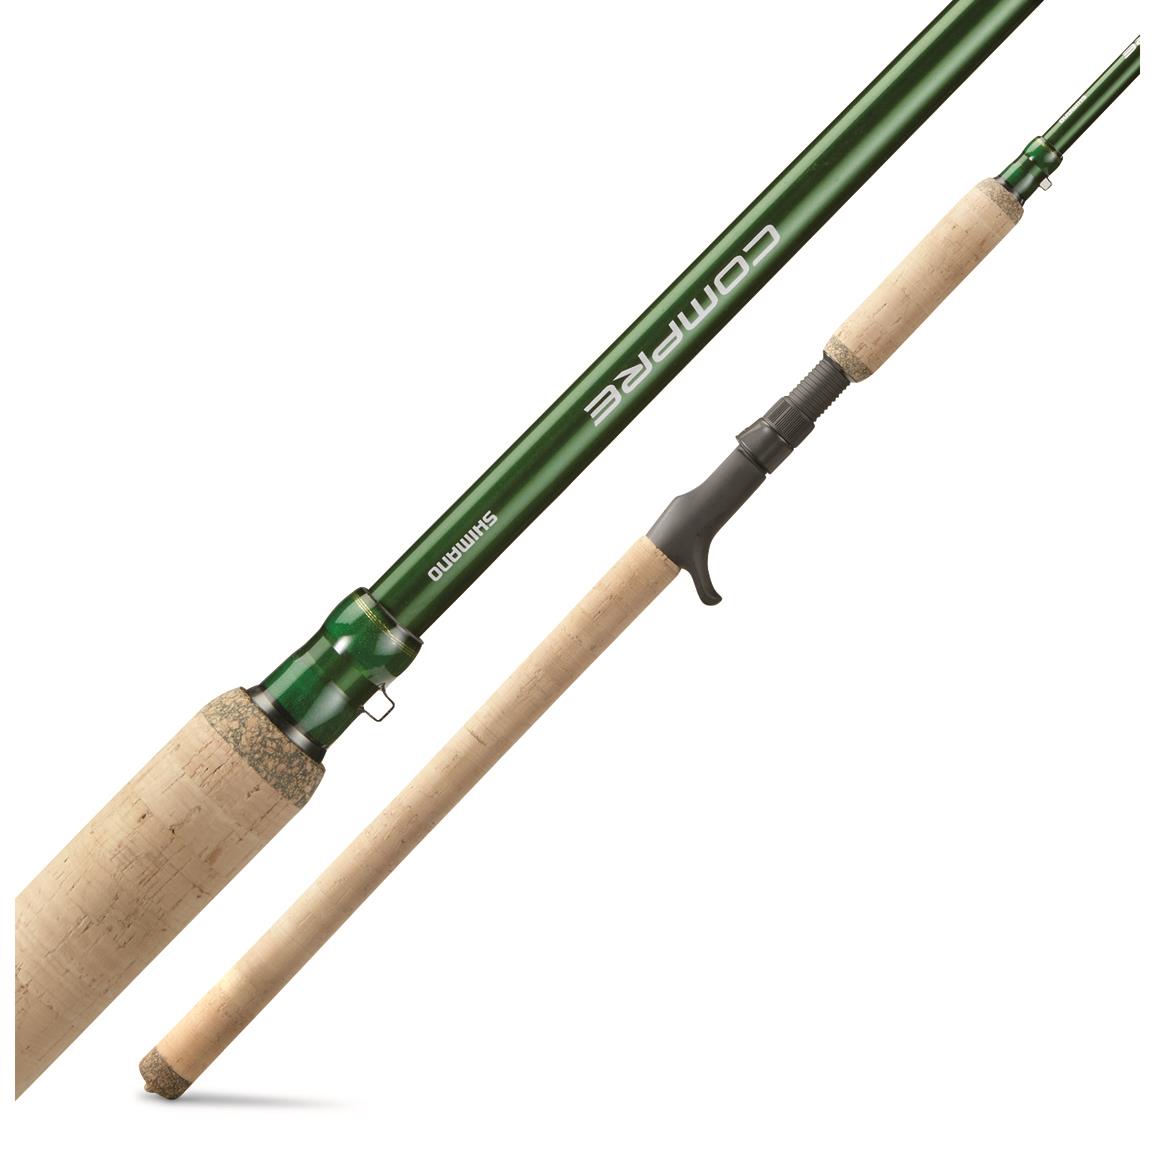 Shimano Compre Muskie Casting Rod, 8'6" Length, Extra Heavy Power, Fast Action